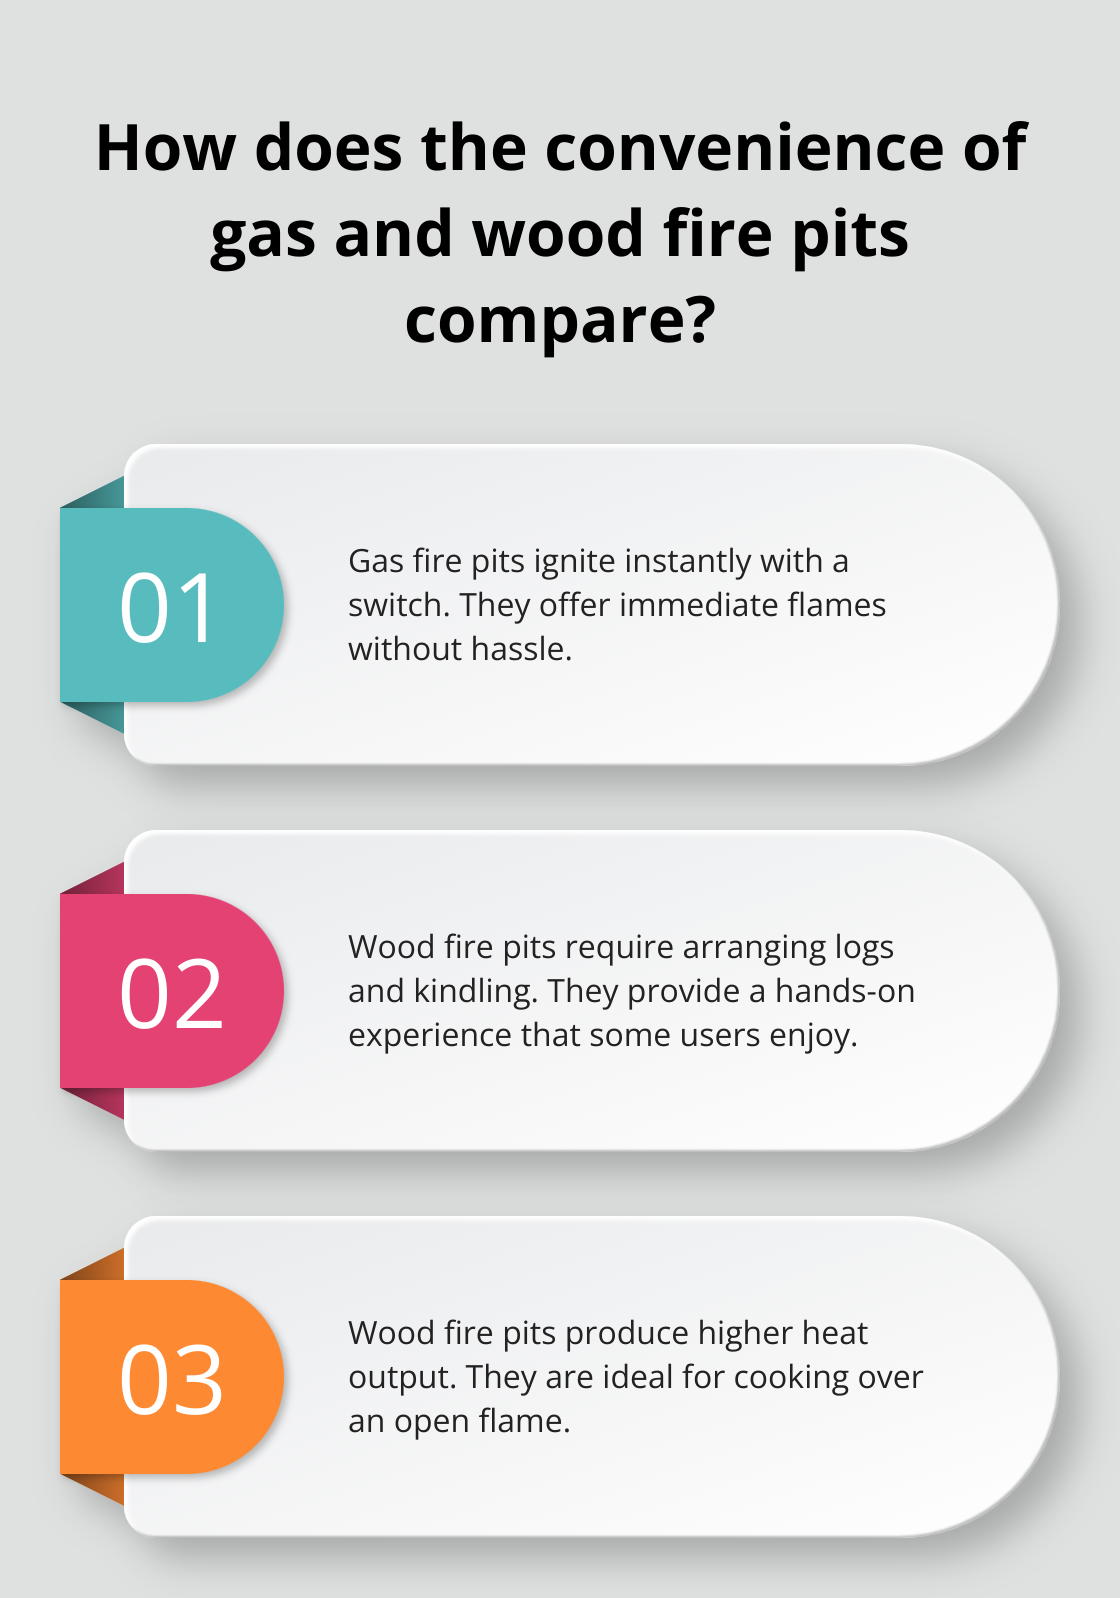 Fact - How does the convenience of gas and wood fire pits compare?